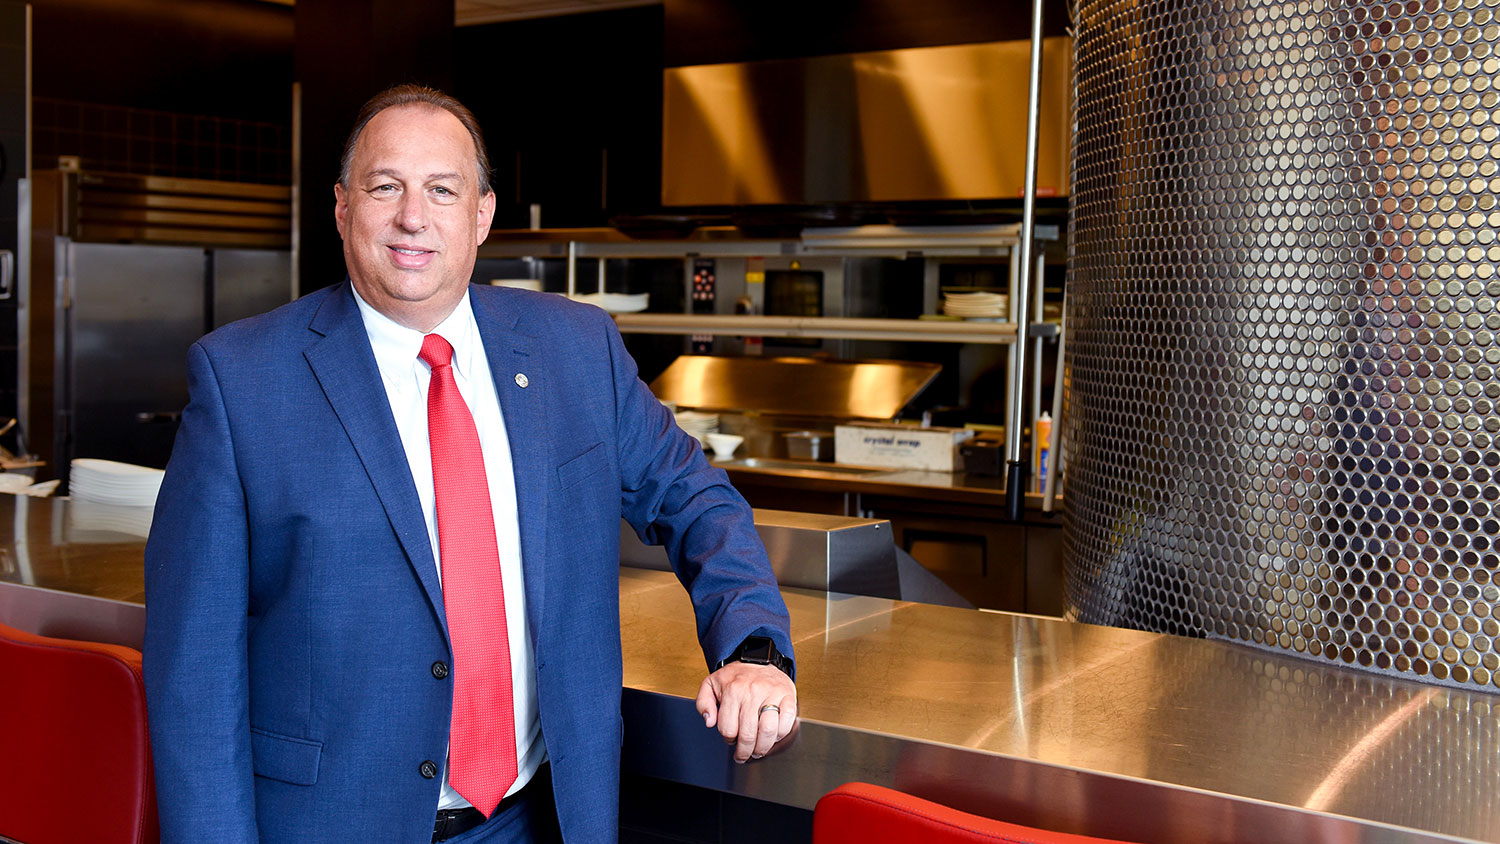 Randy Lait, senior director of administrative services for Campus Enterprises, at NC State's 1887 restaurant.